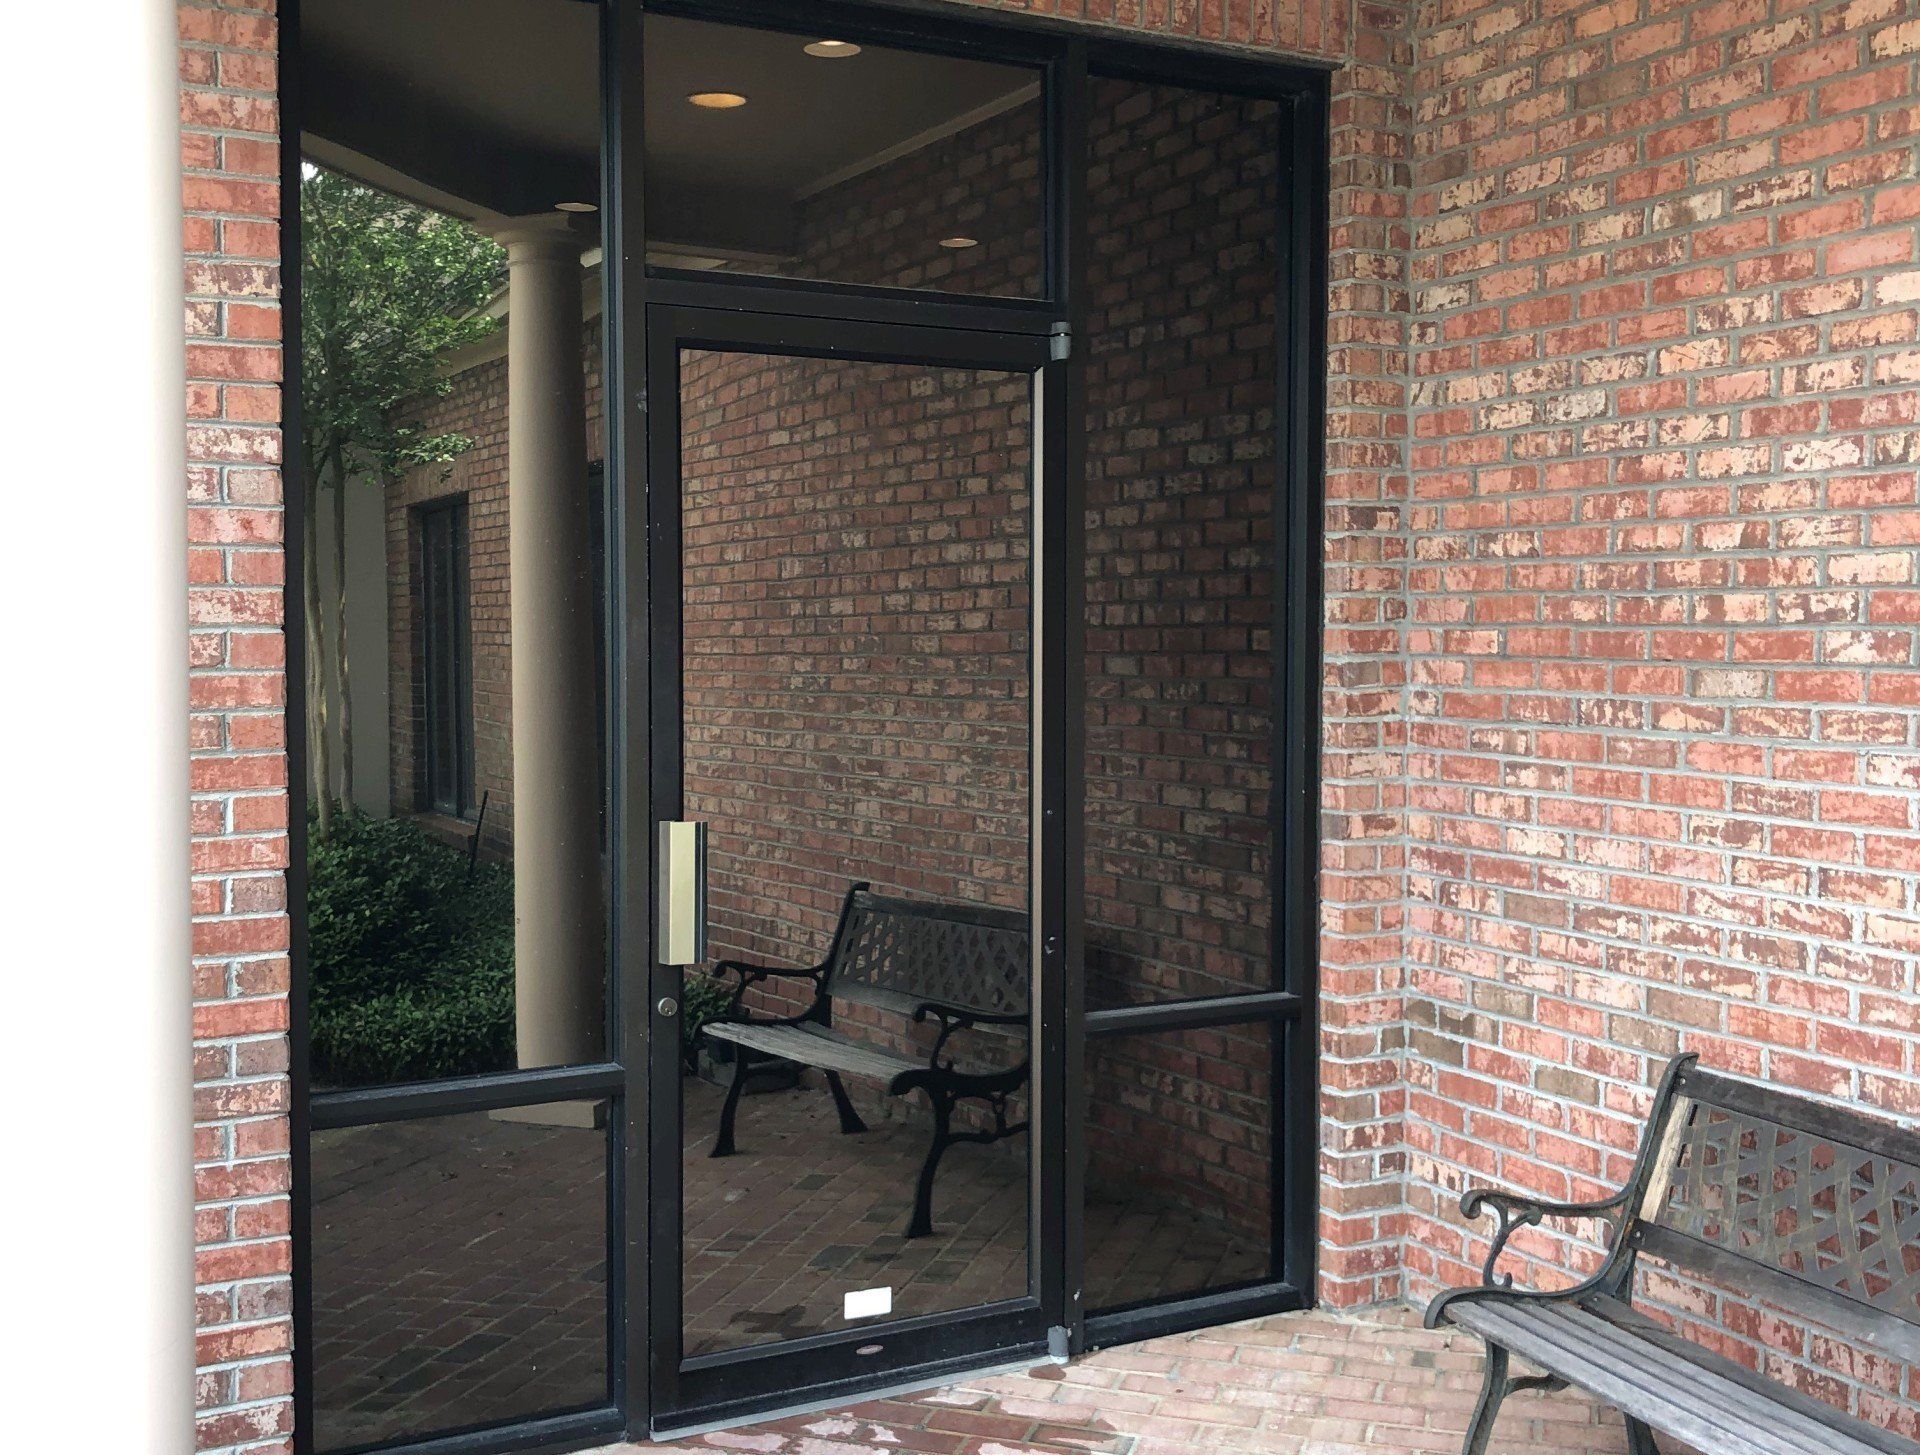 Business tint installed at Garry S McAnnally Law office in Montgomery, AL